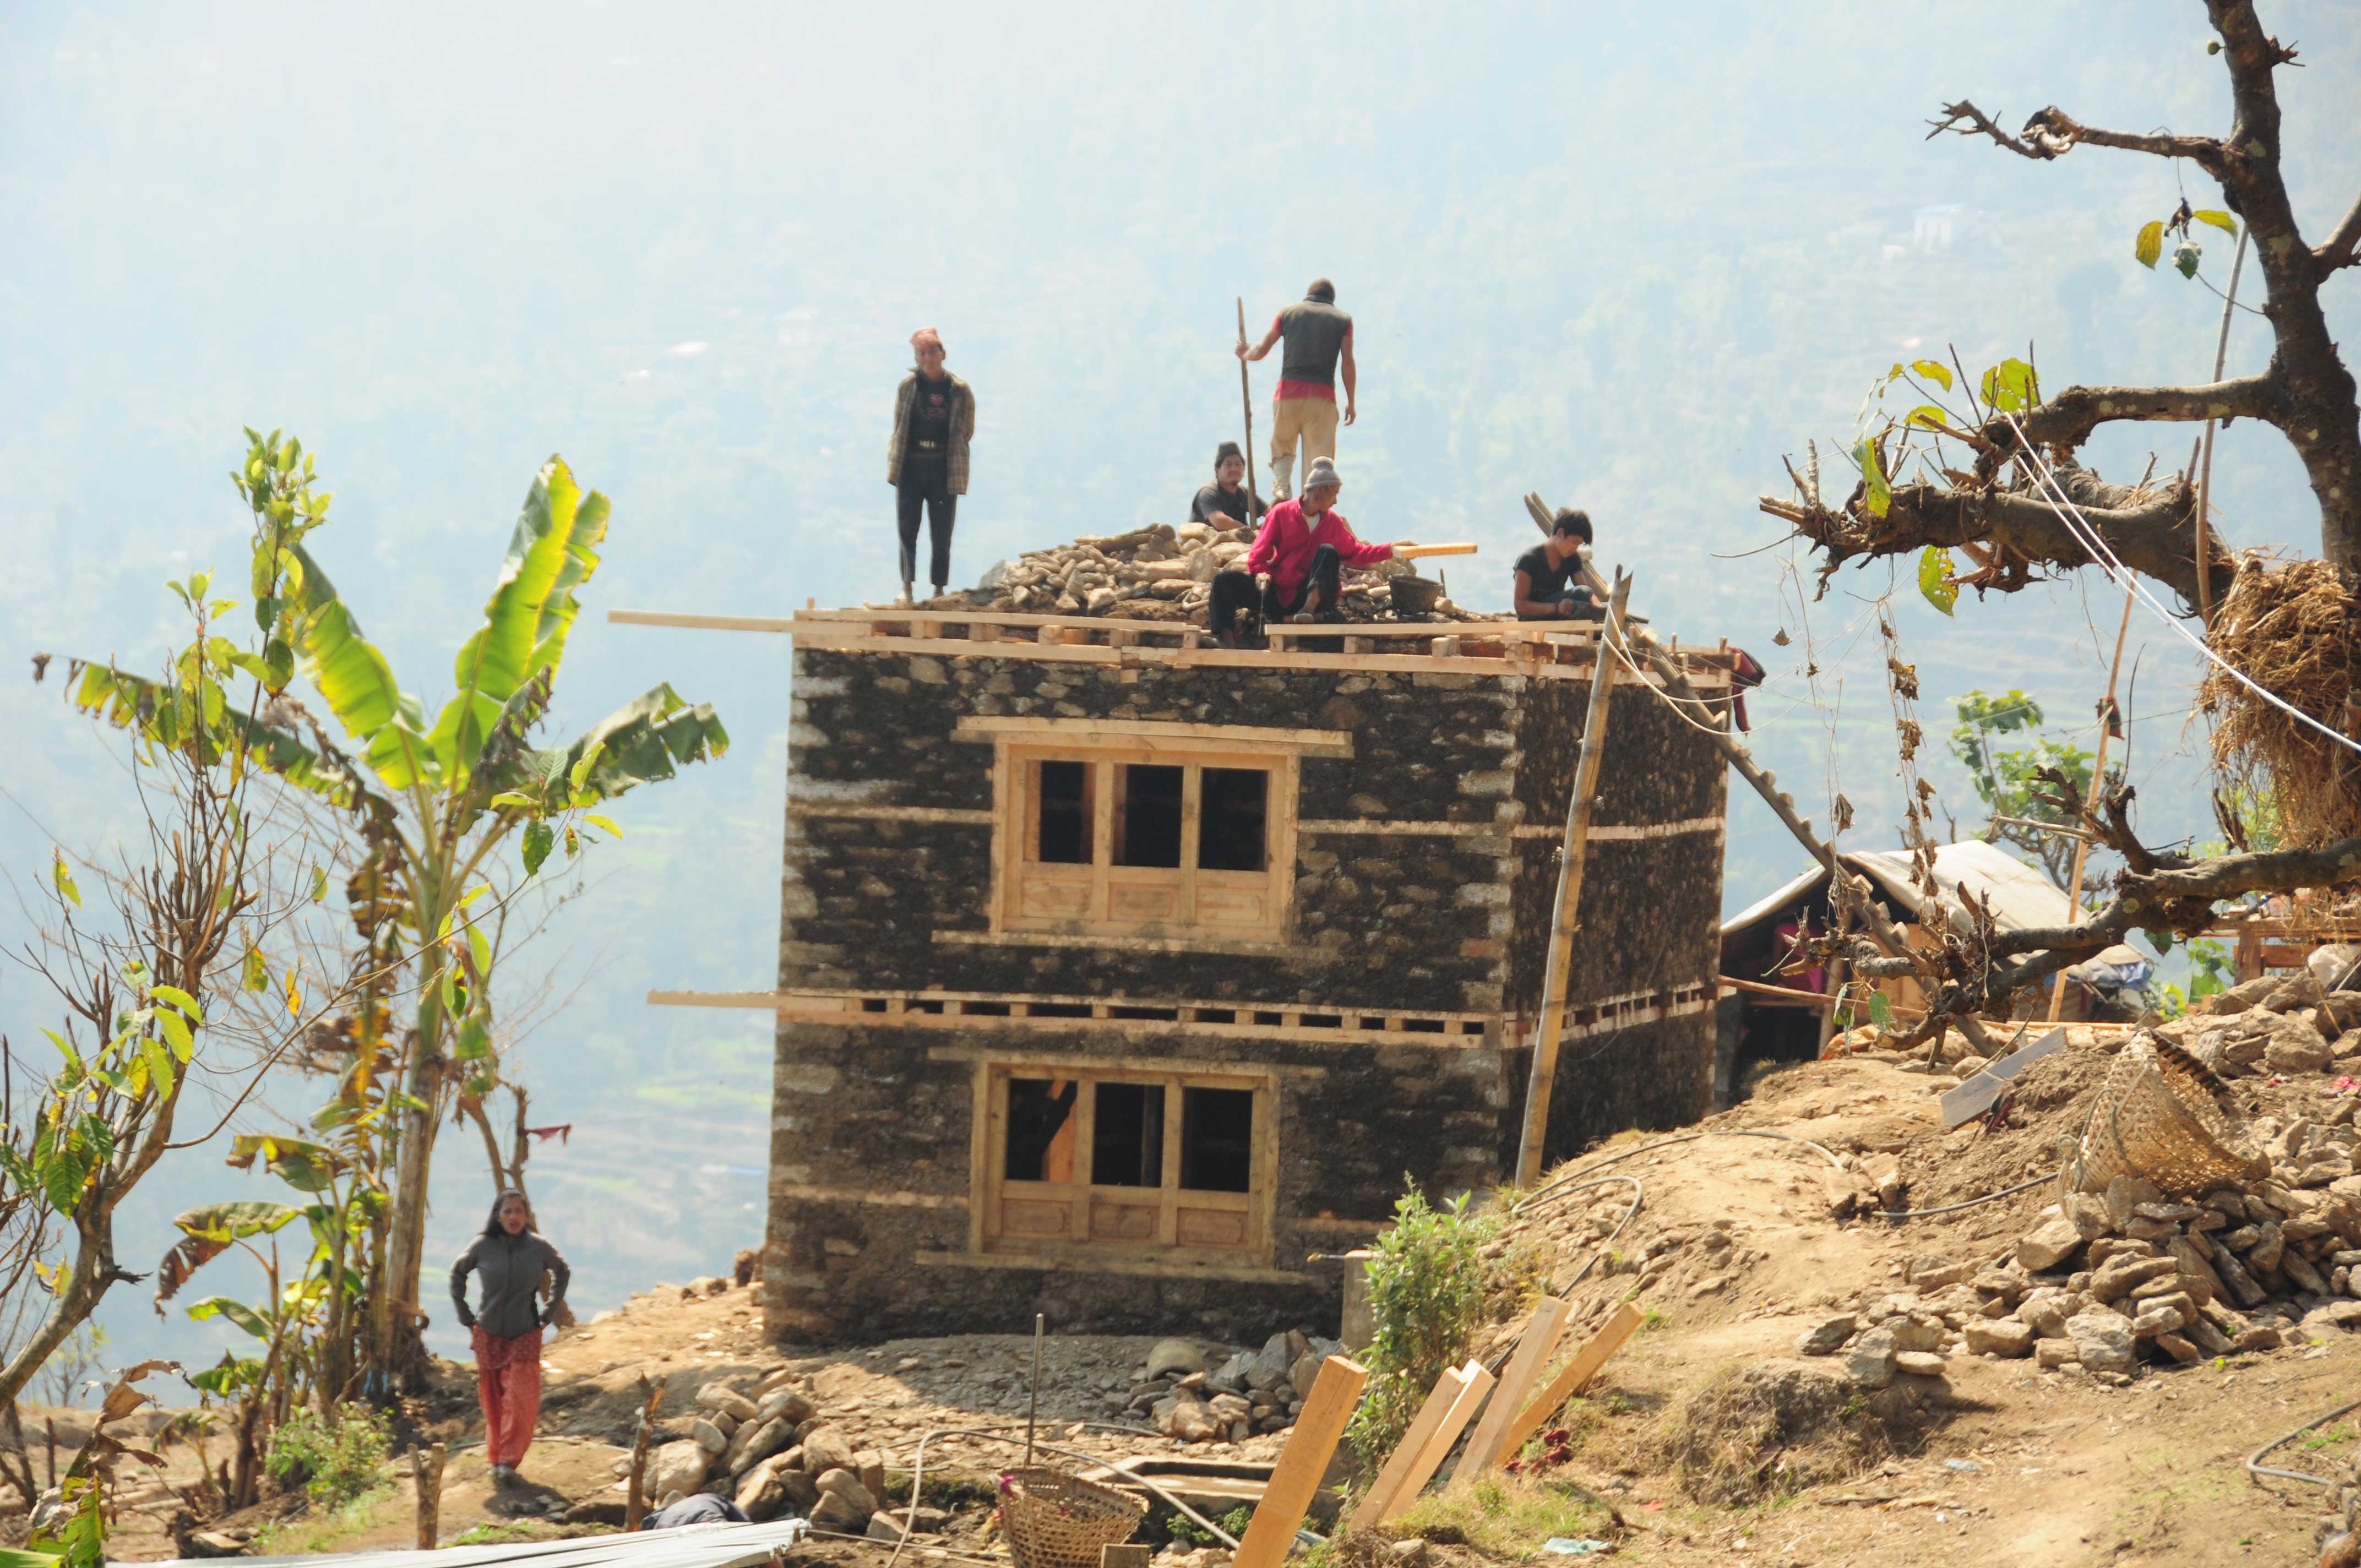 Tracking Conditions on the Ground in Post-Earthquake Nepal - The Asia Foundation